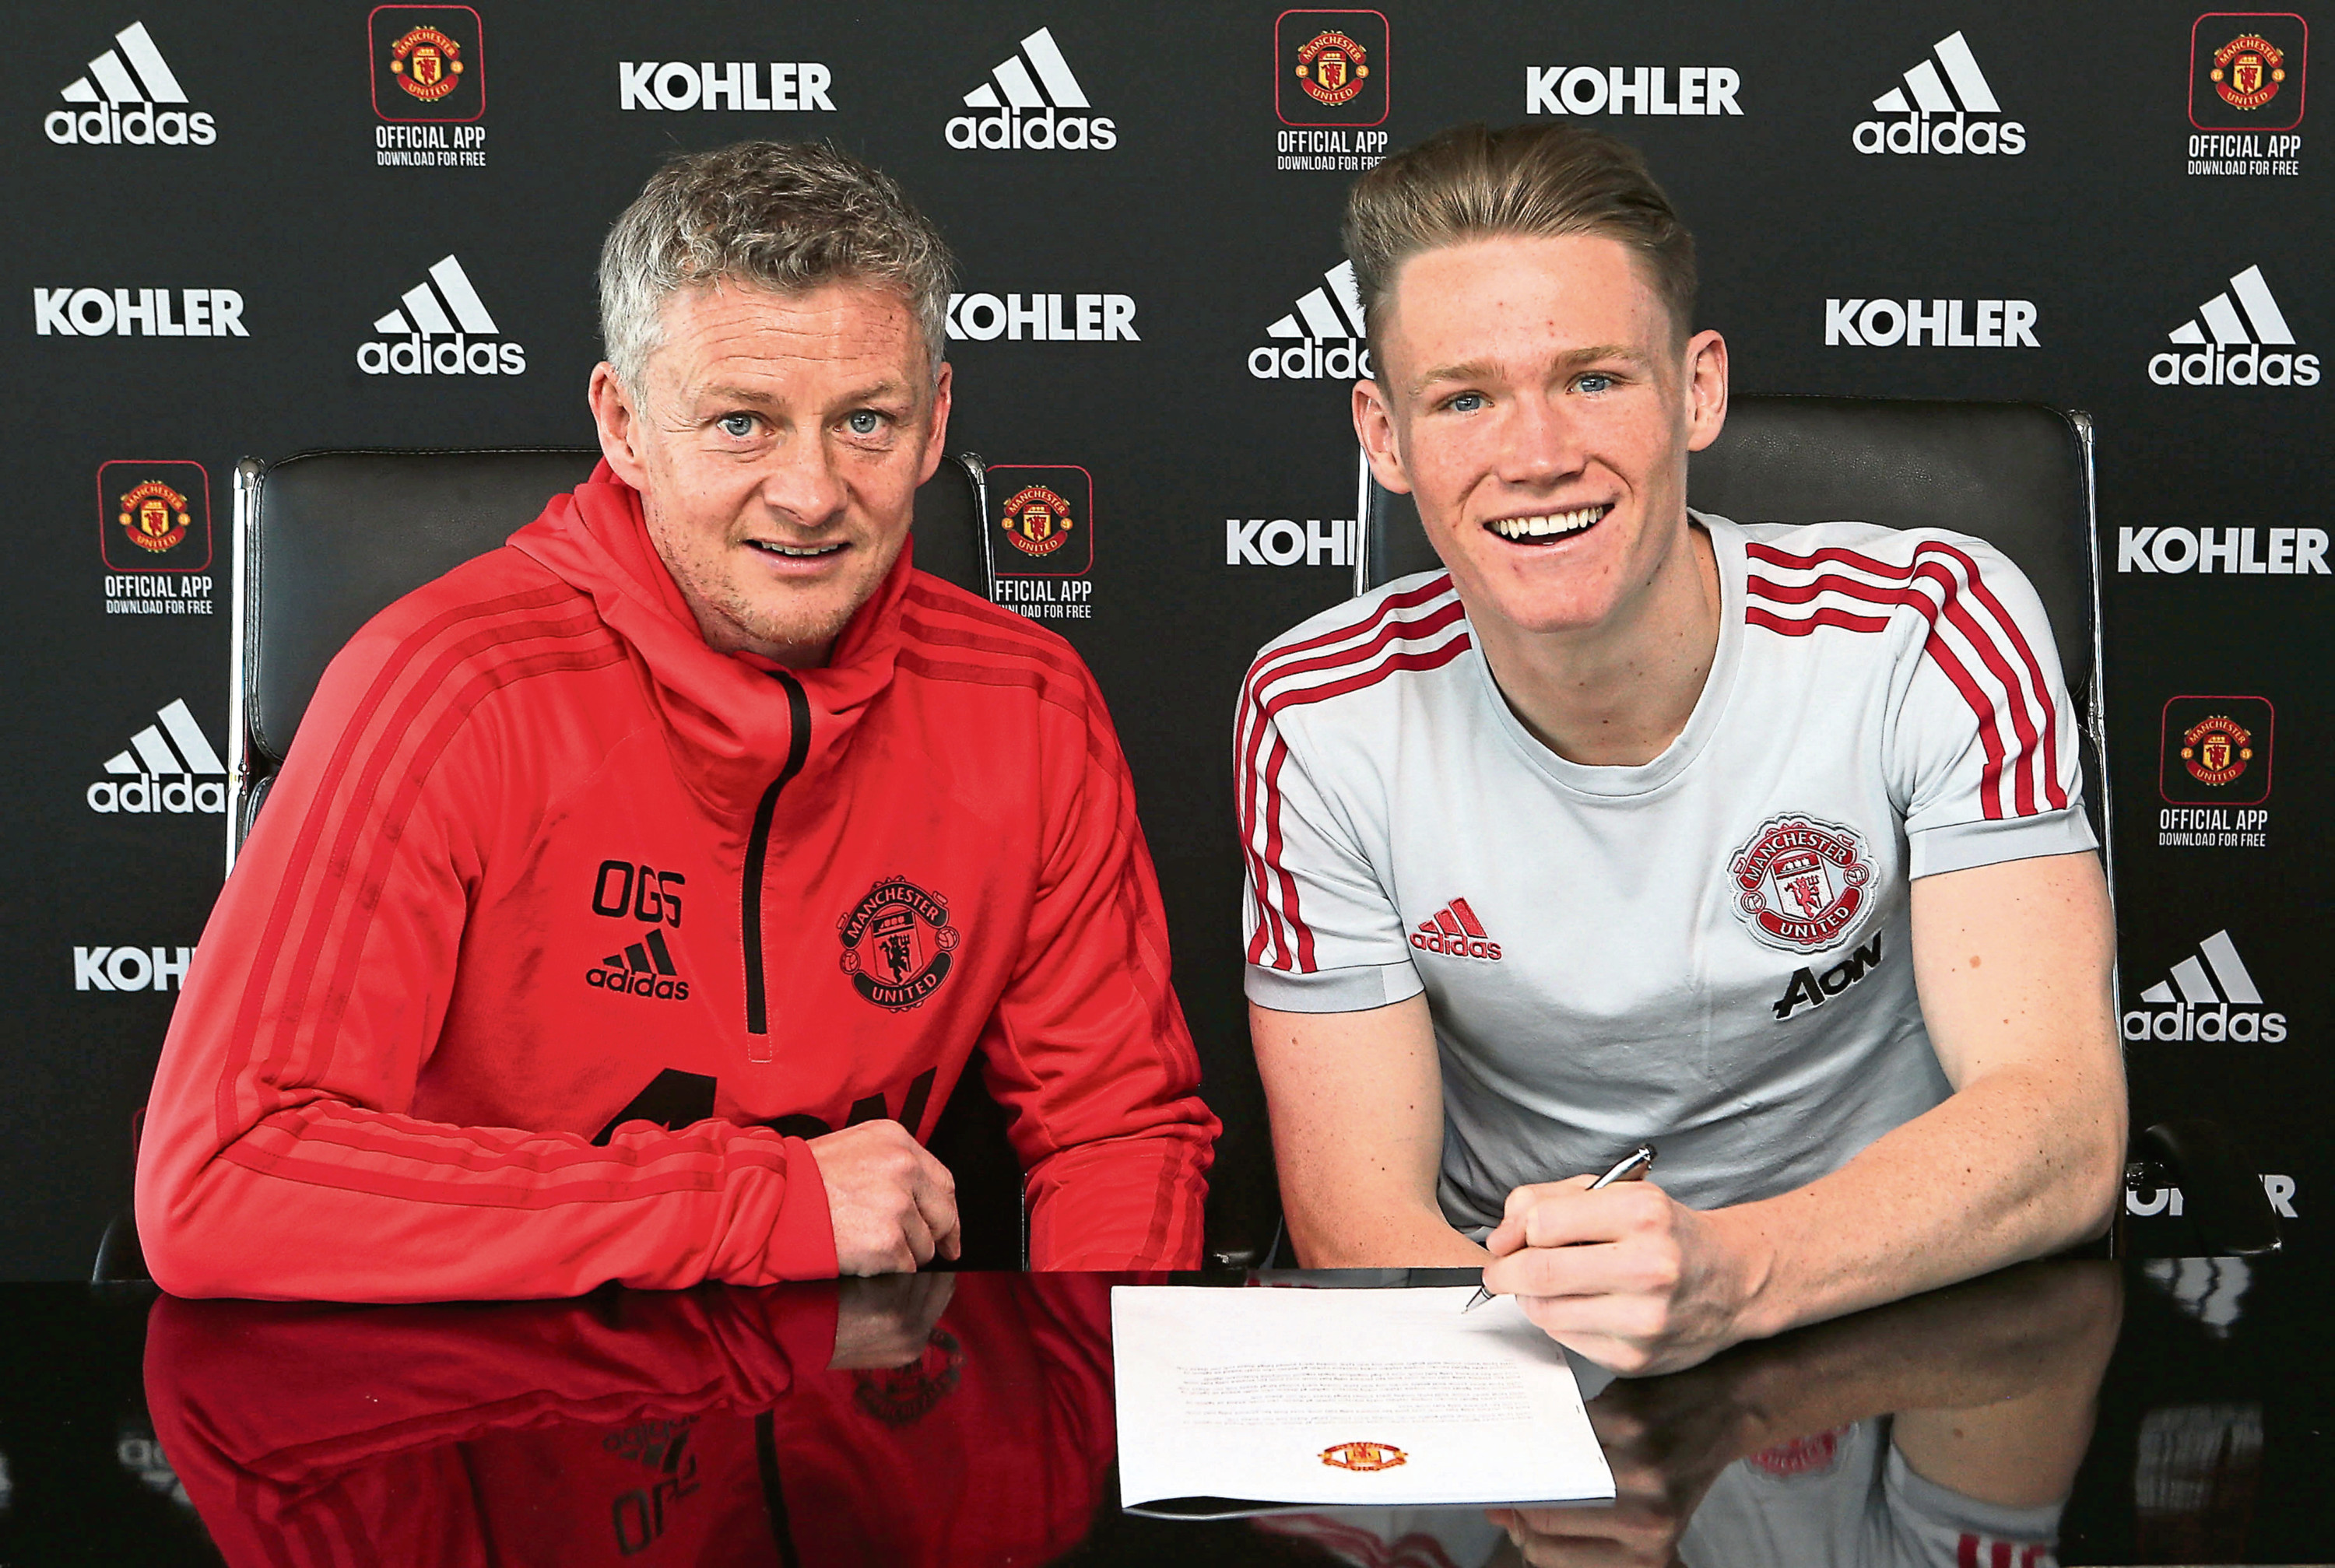 x
MANCHESTER, ENGLAND - JANUARY 21: (EXCLUSIVE COVERAGE)  Scott McTominay of Manchester United poses after signing a contract extension with the club at Aon Training Complex on January 21, 2019 in Manchester, England. (Tom Purslow/Man Utd via Getty Images)